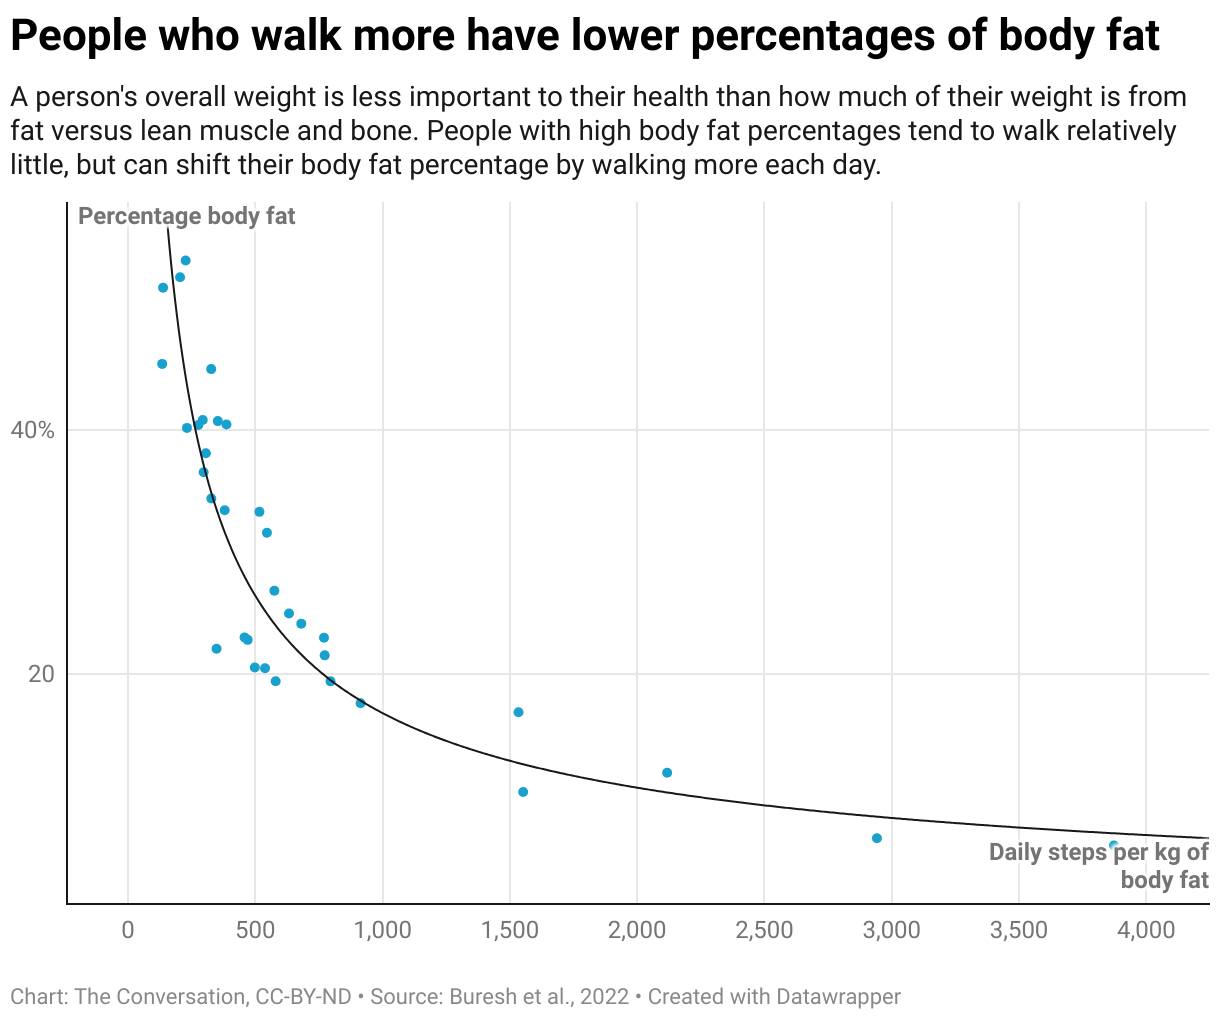 People who walk have lower percentages of body fat.